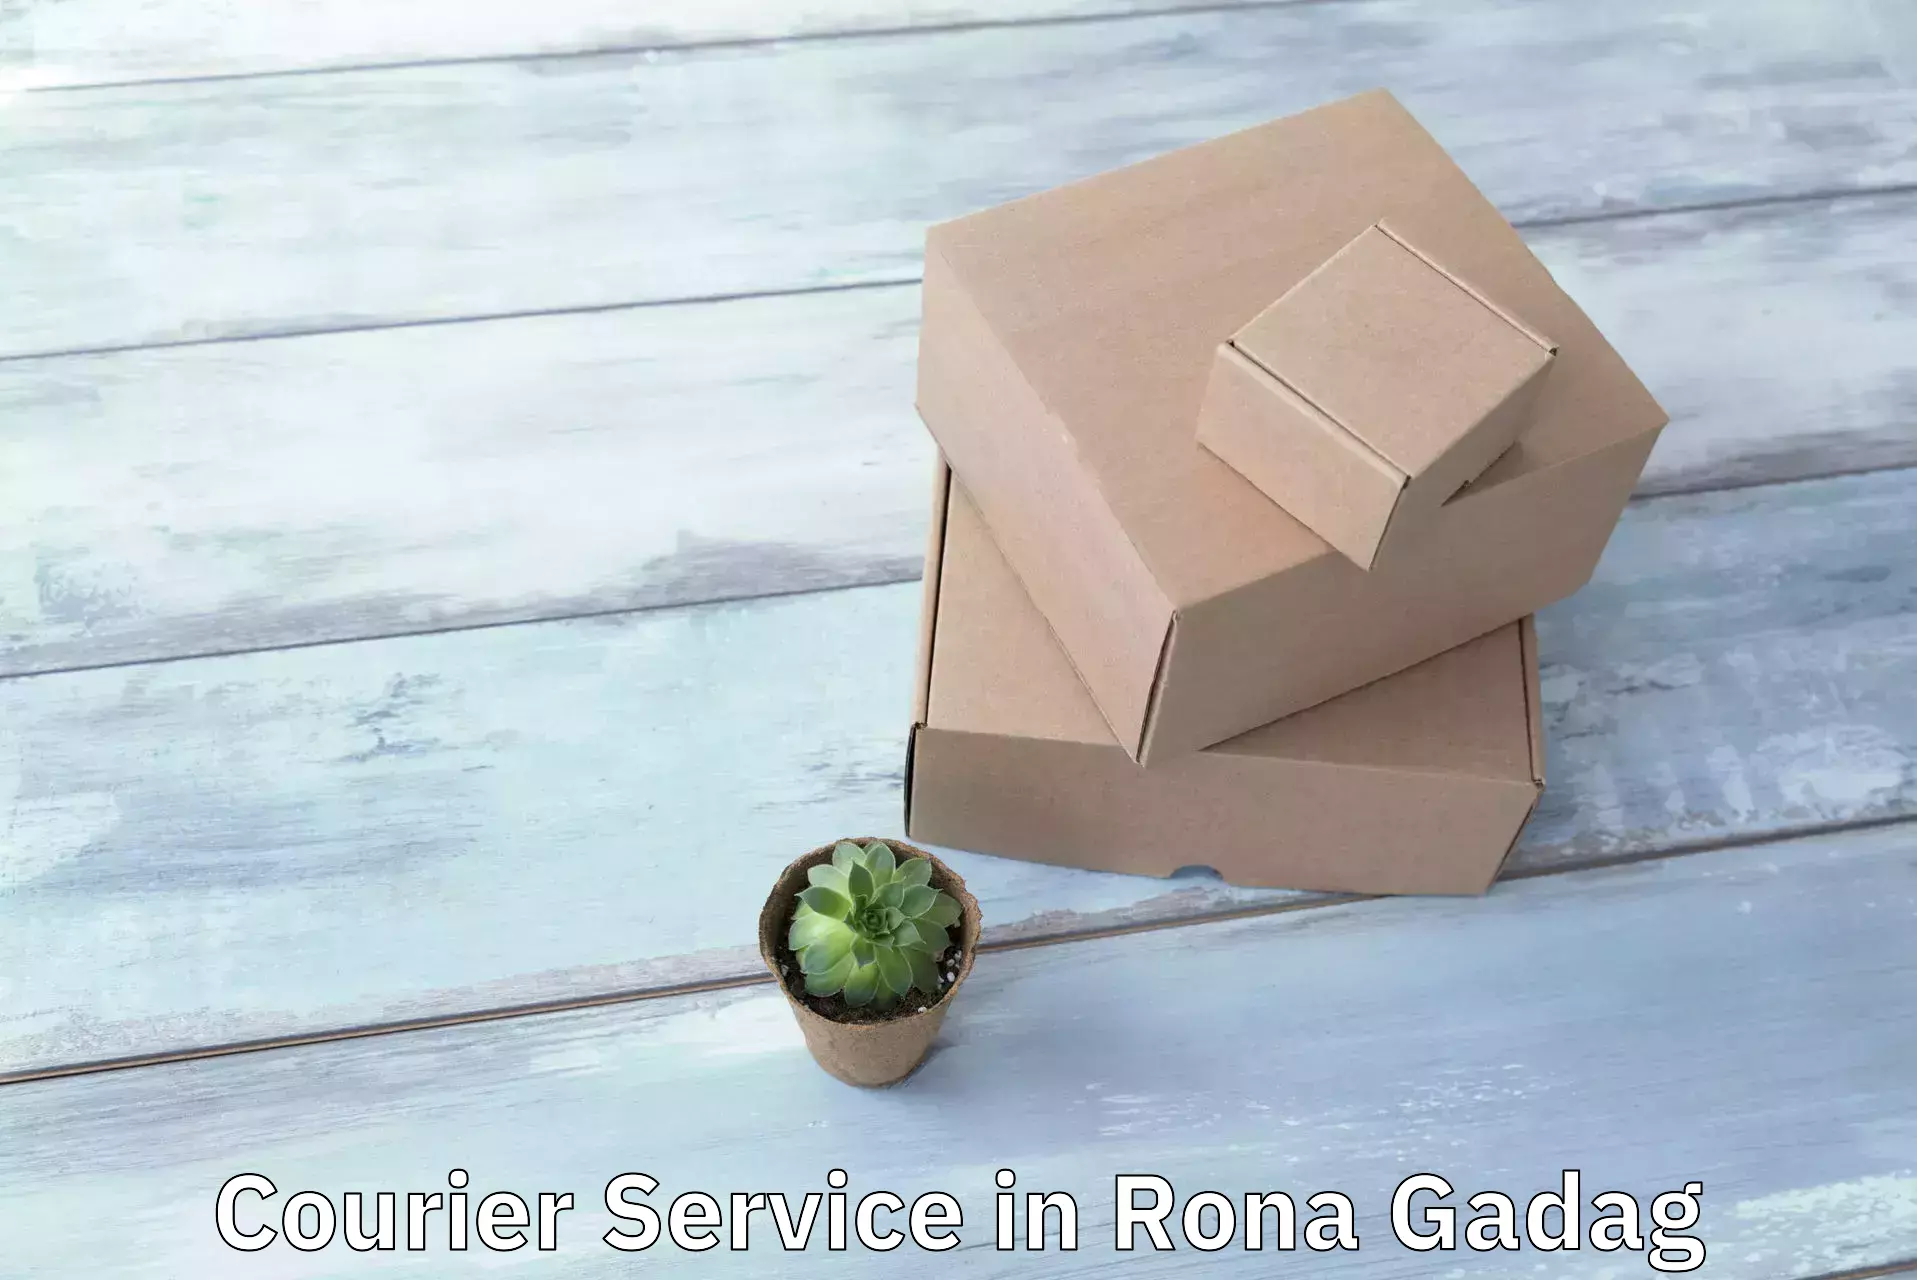 Tailored shipping services in Rona Gadag